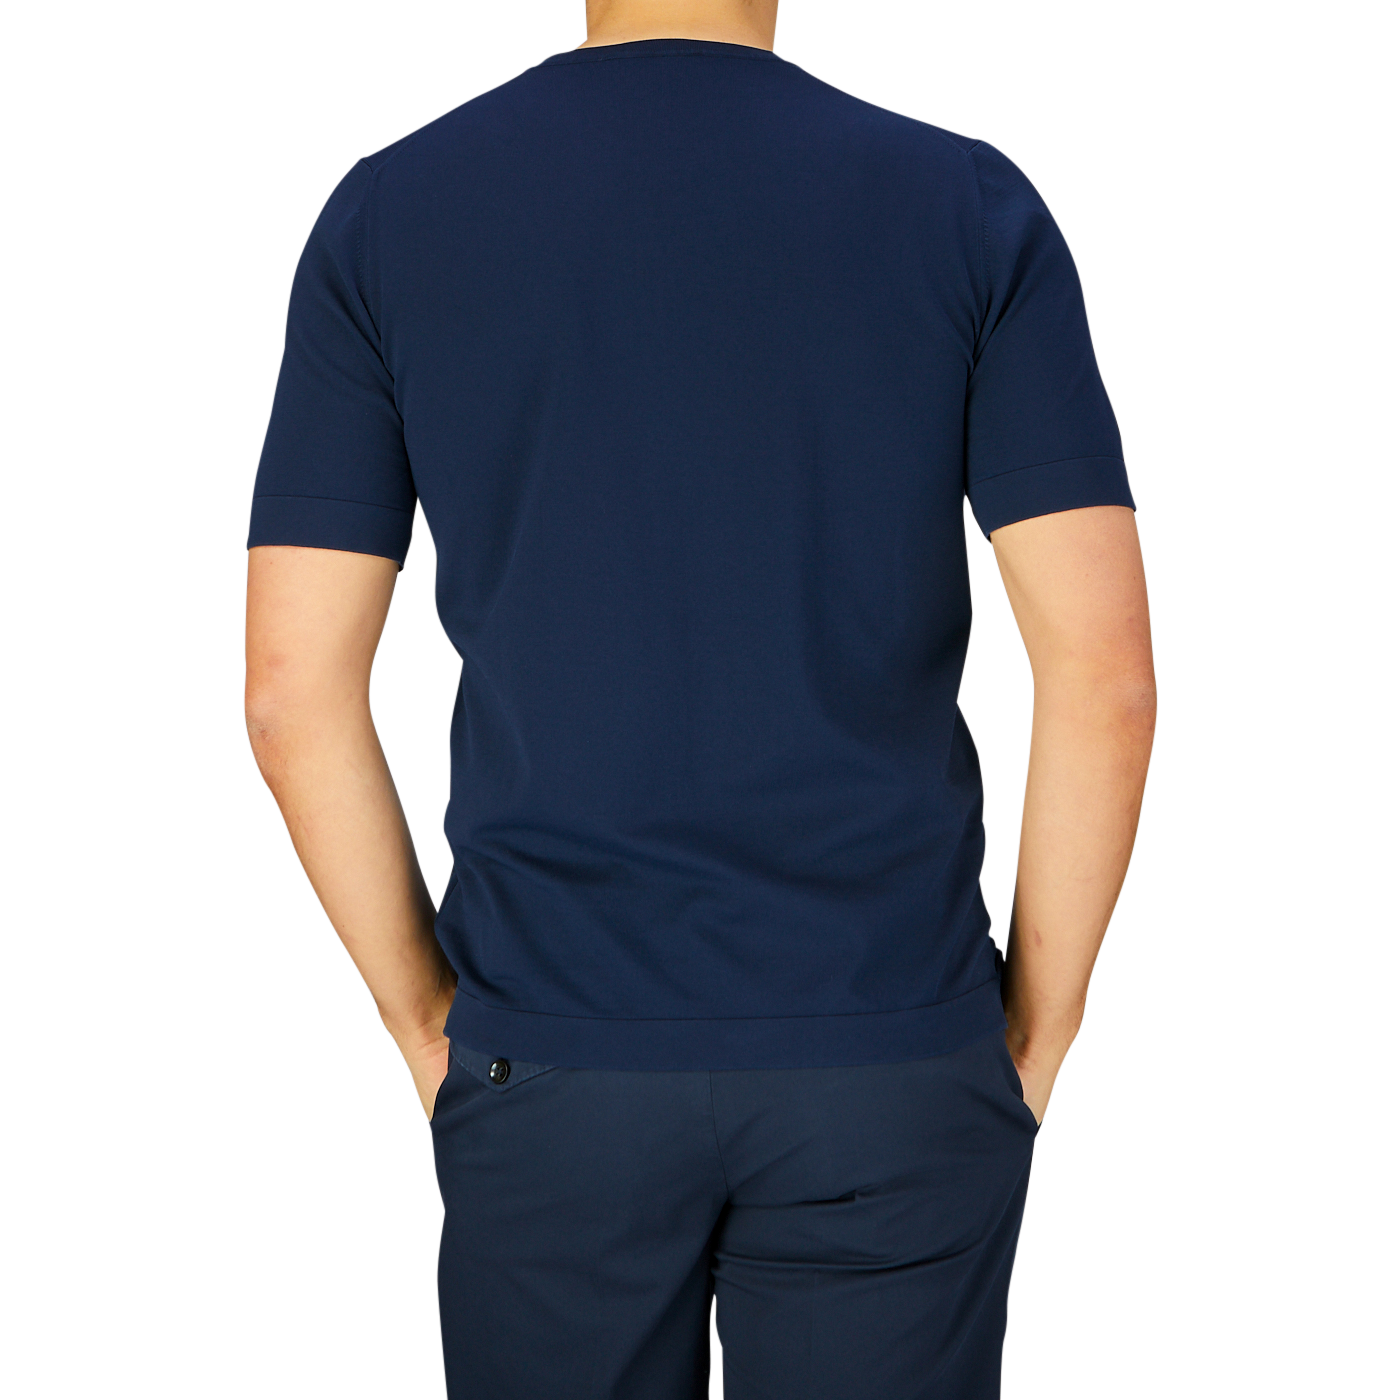 Man wearing a Gran Sasso navy blue organic cotton t-shirt and pants, viewed from the back.